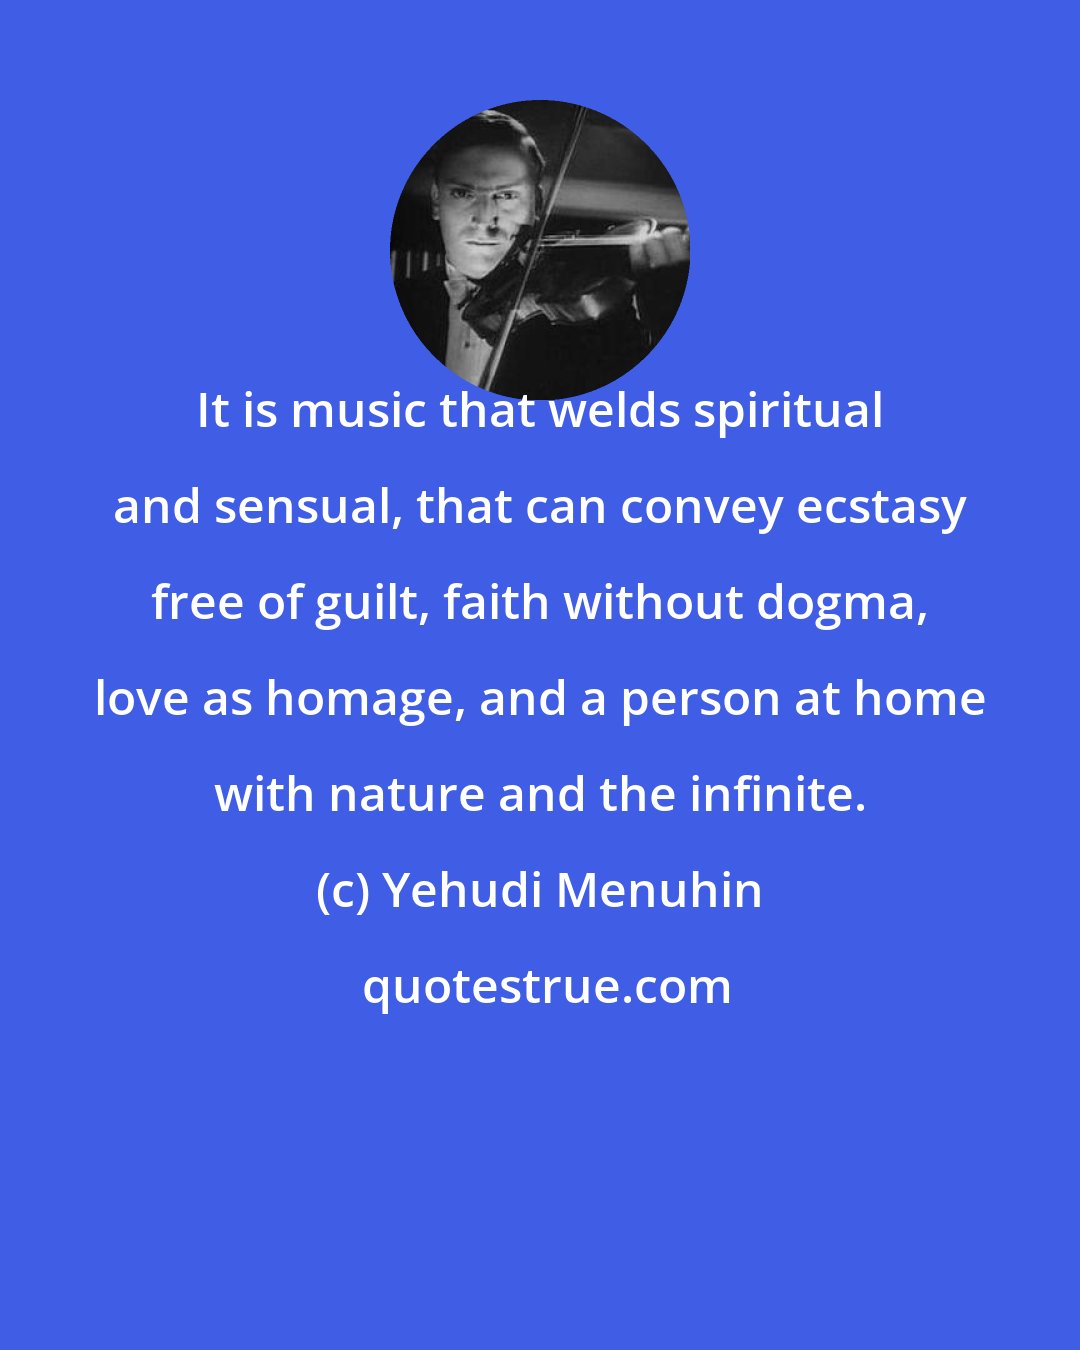 Yehudi Menuhin: It is music that welds spiritual and sensual, that can convey ecstasy free of guilt, faith without dogma, love as homage, and a person at home with nature and the infinite.